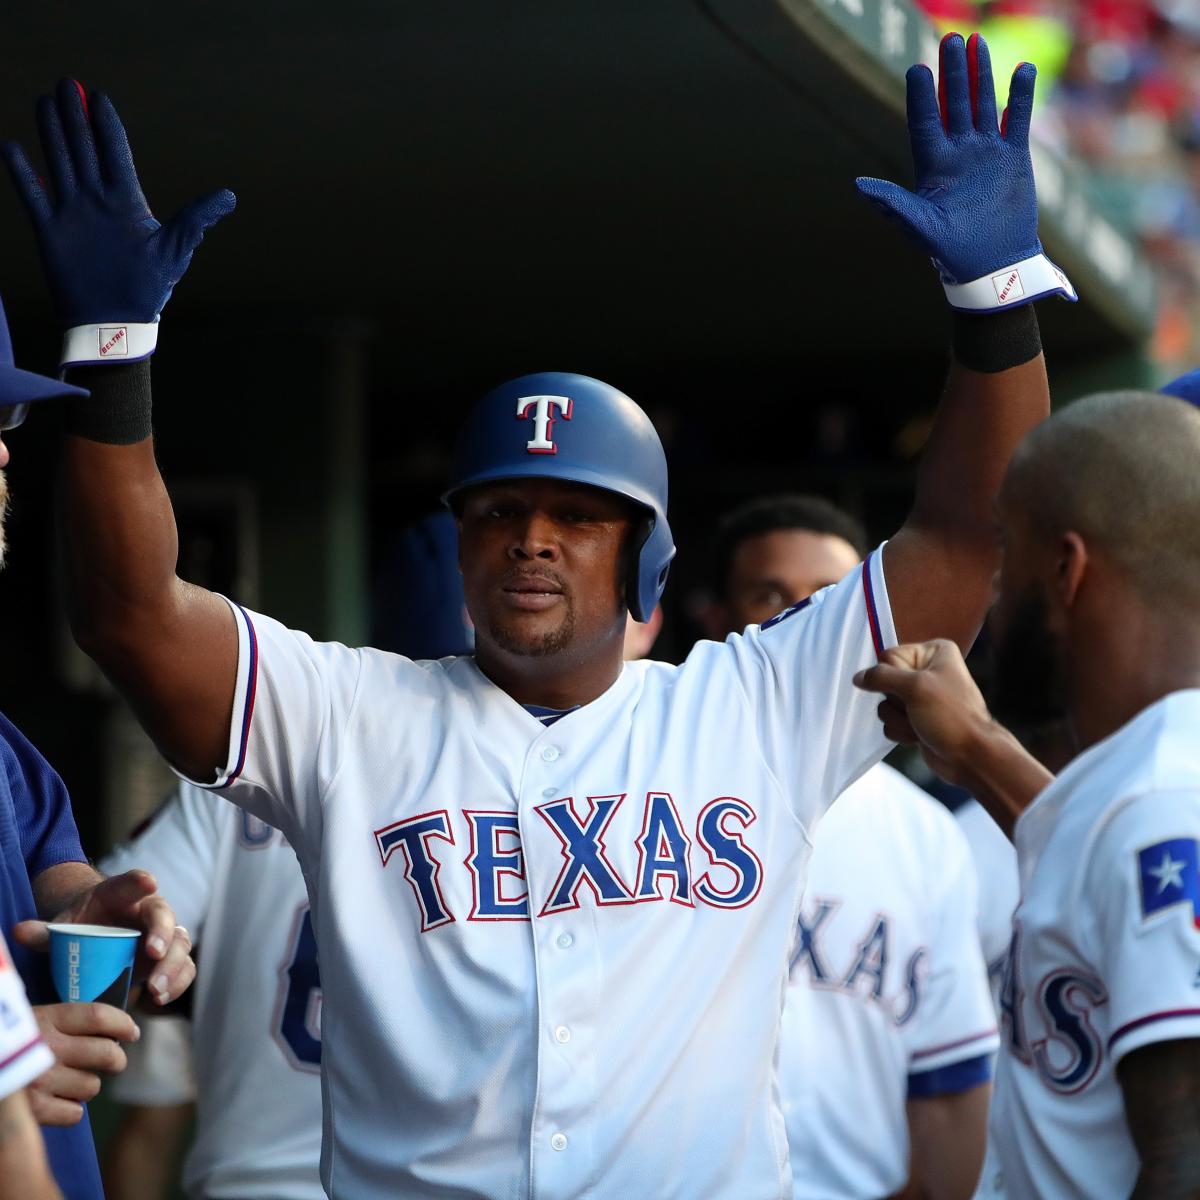 Retired player Adrian Beltre, jokingly tosses a robe gifted to him